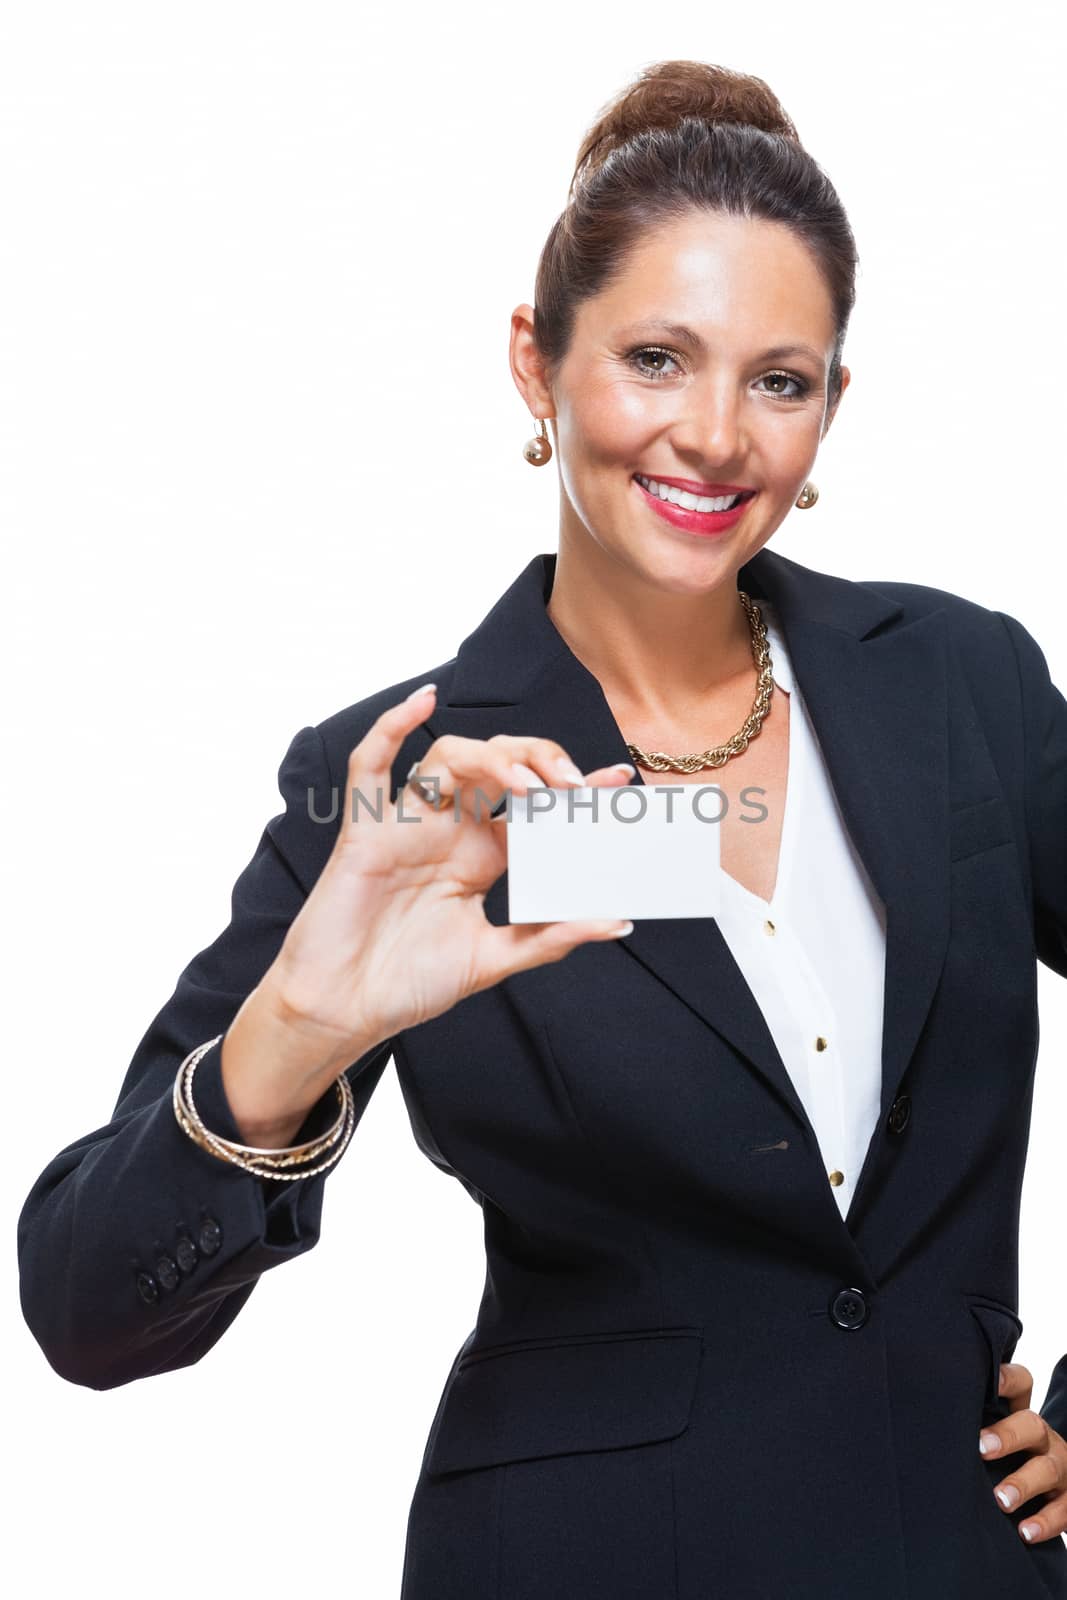 Portrait of a Happy Businesswoman Holding Small White Card with Copy Space, Isolated on White Background.